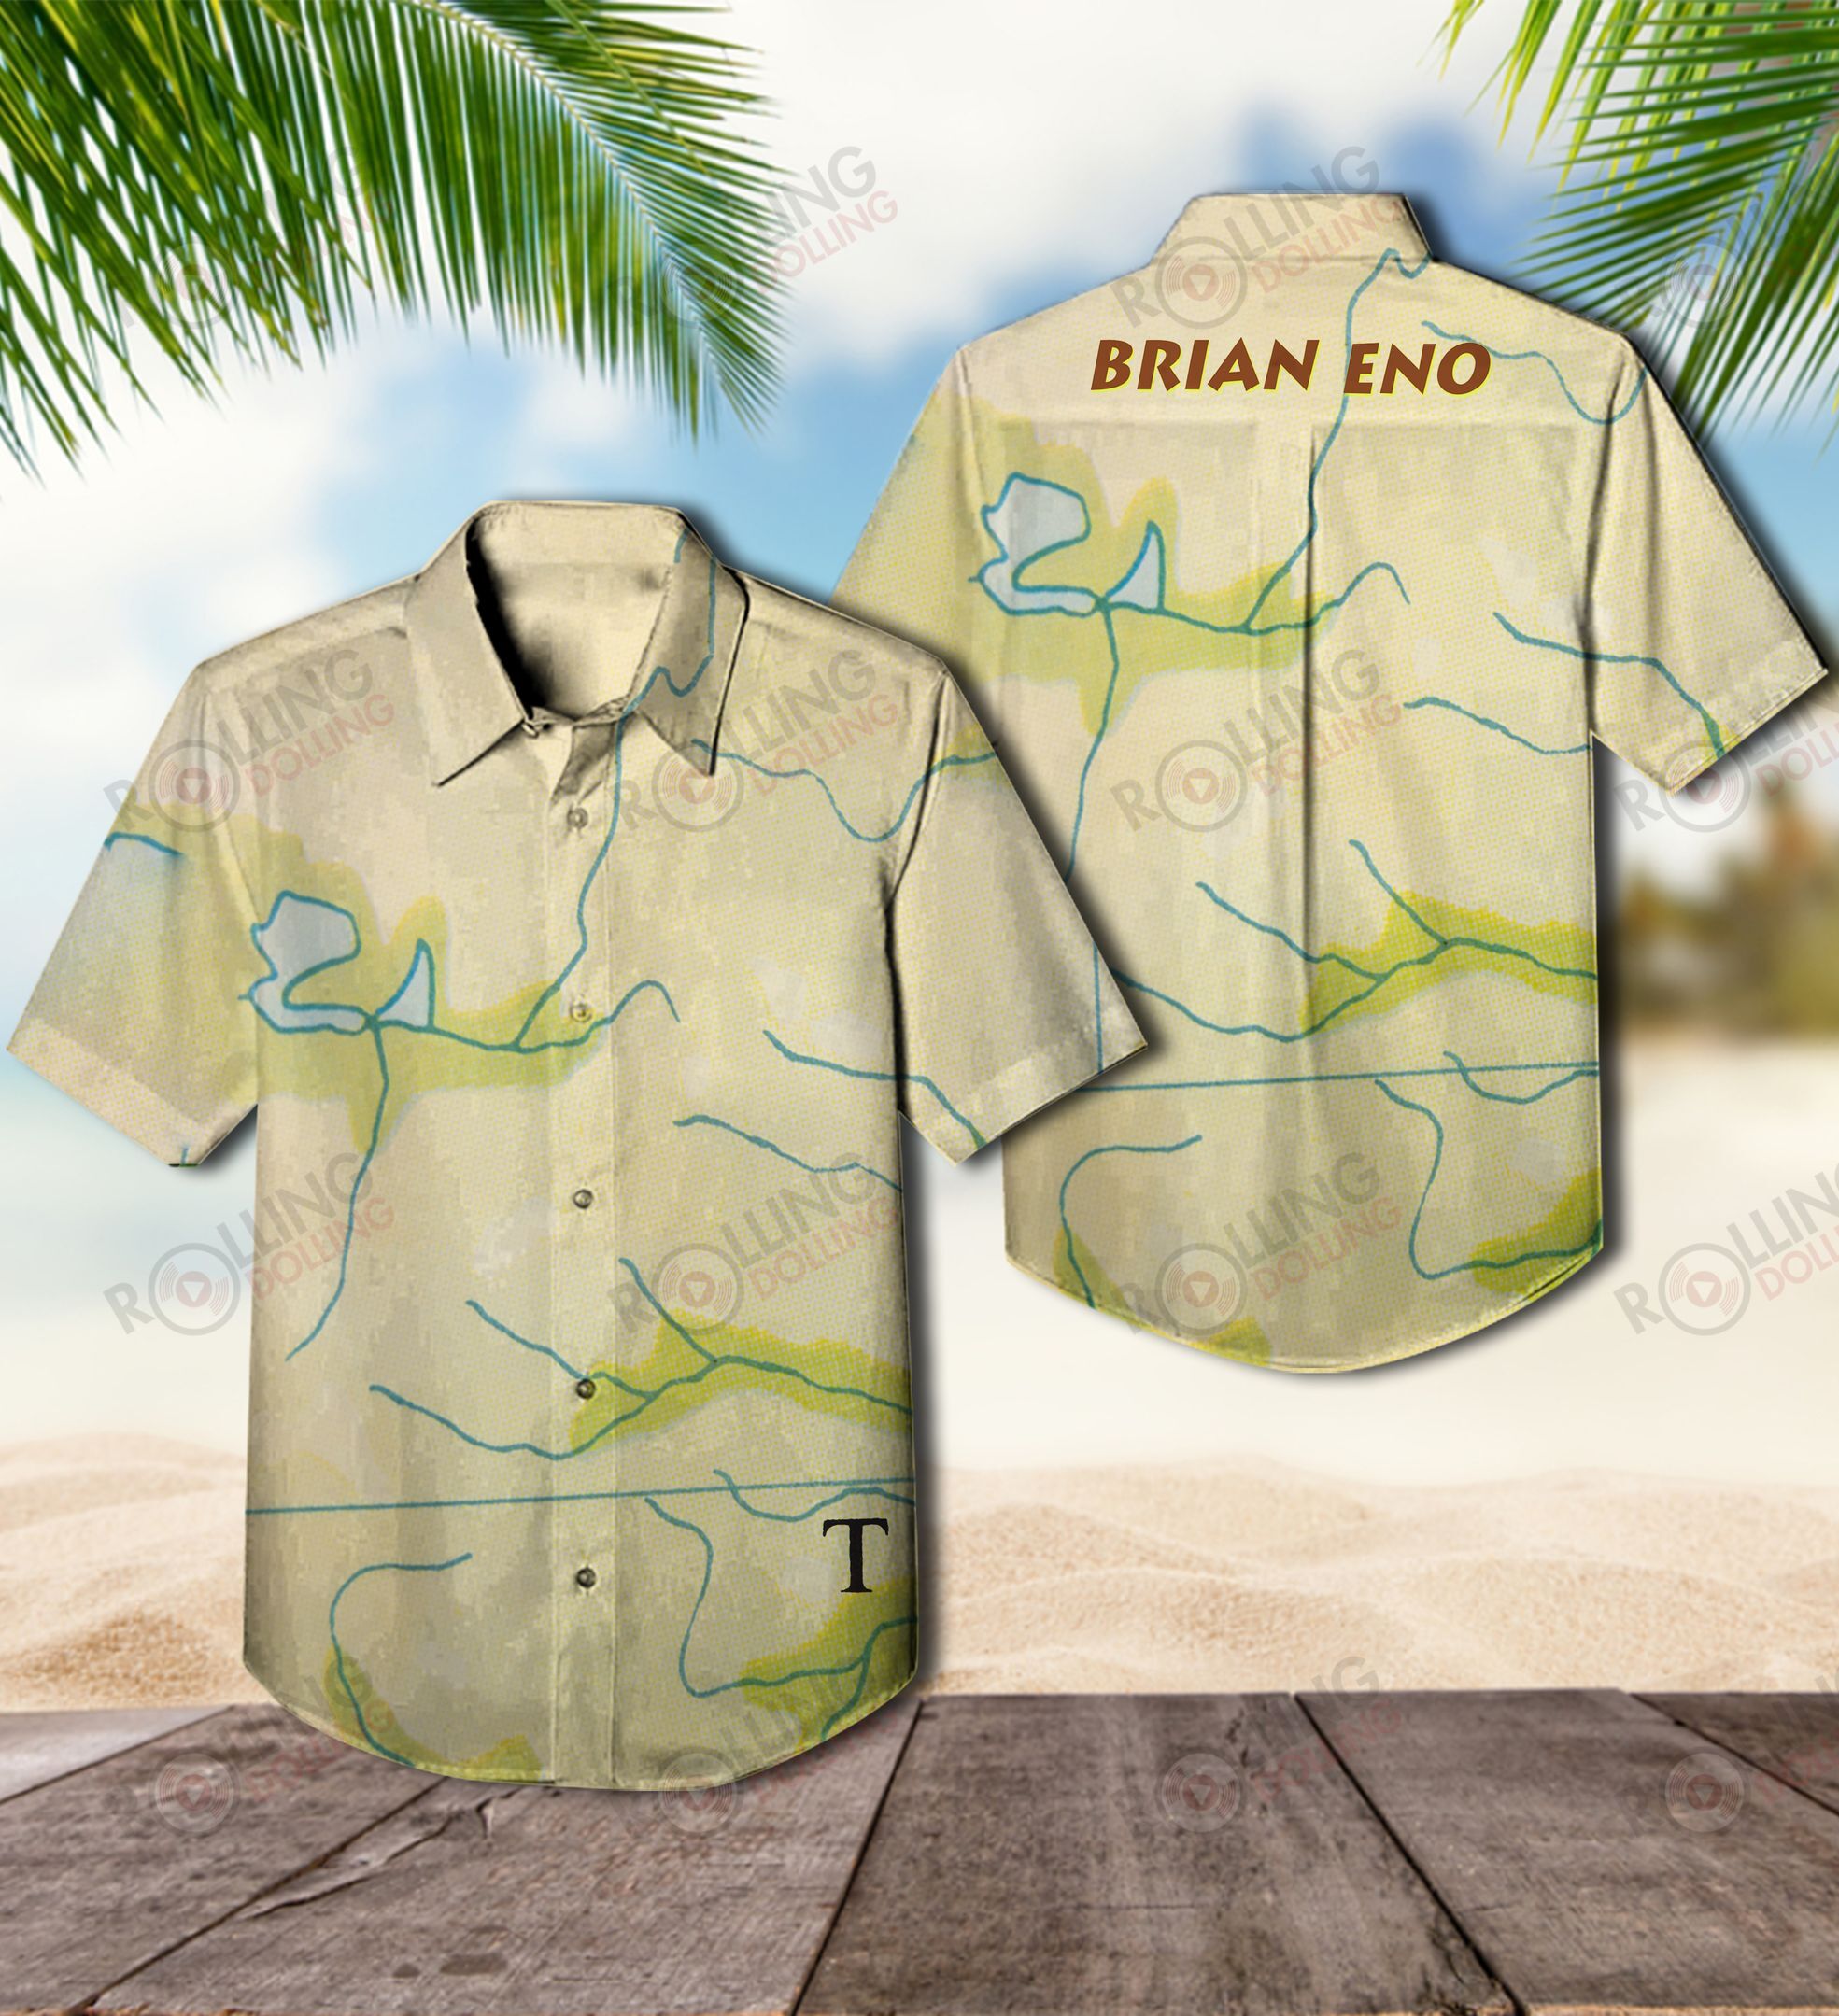 The Hawaiian Shirt is a popular shirt that is worn by Rock band fans 38